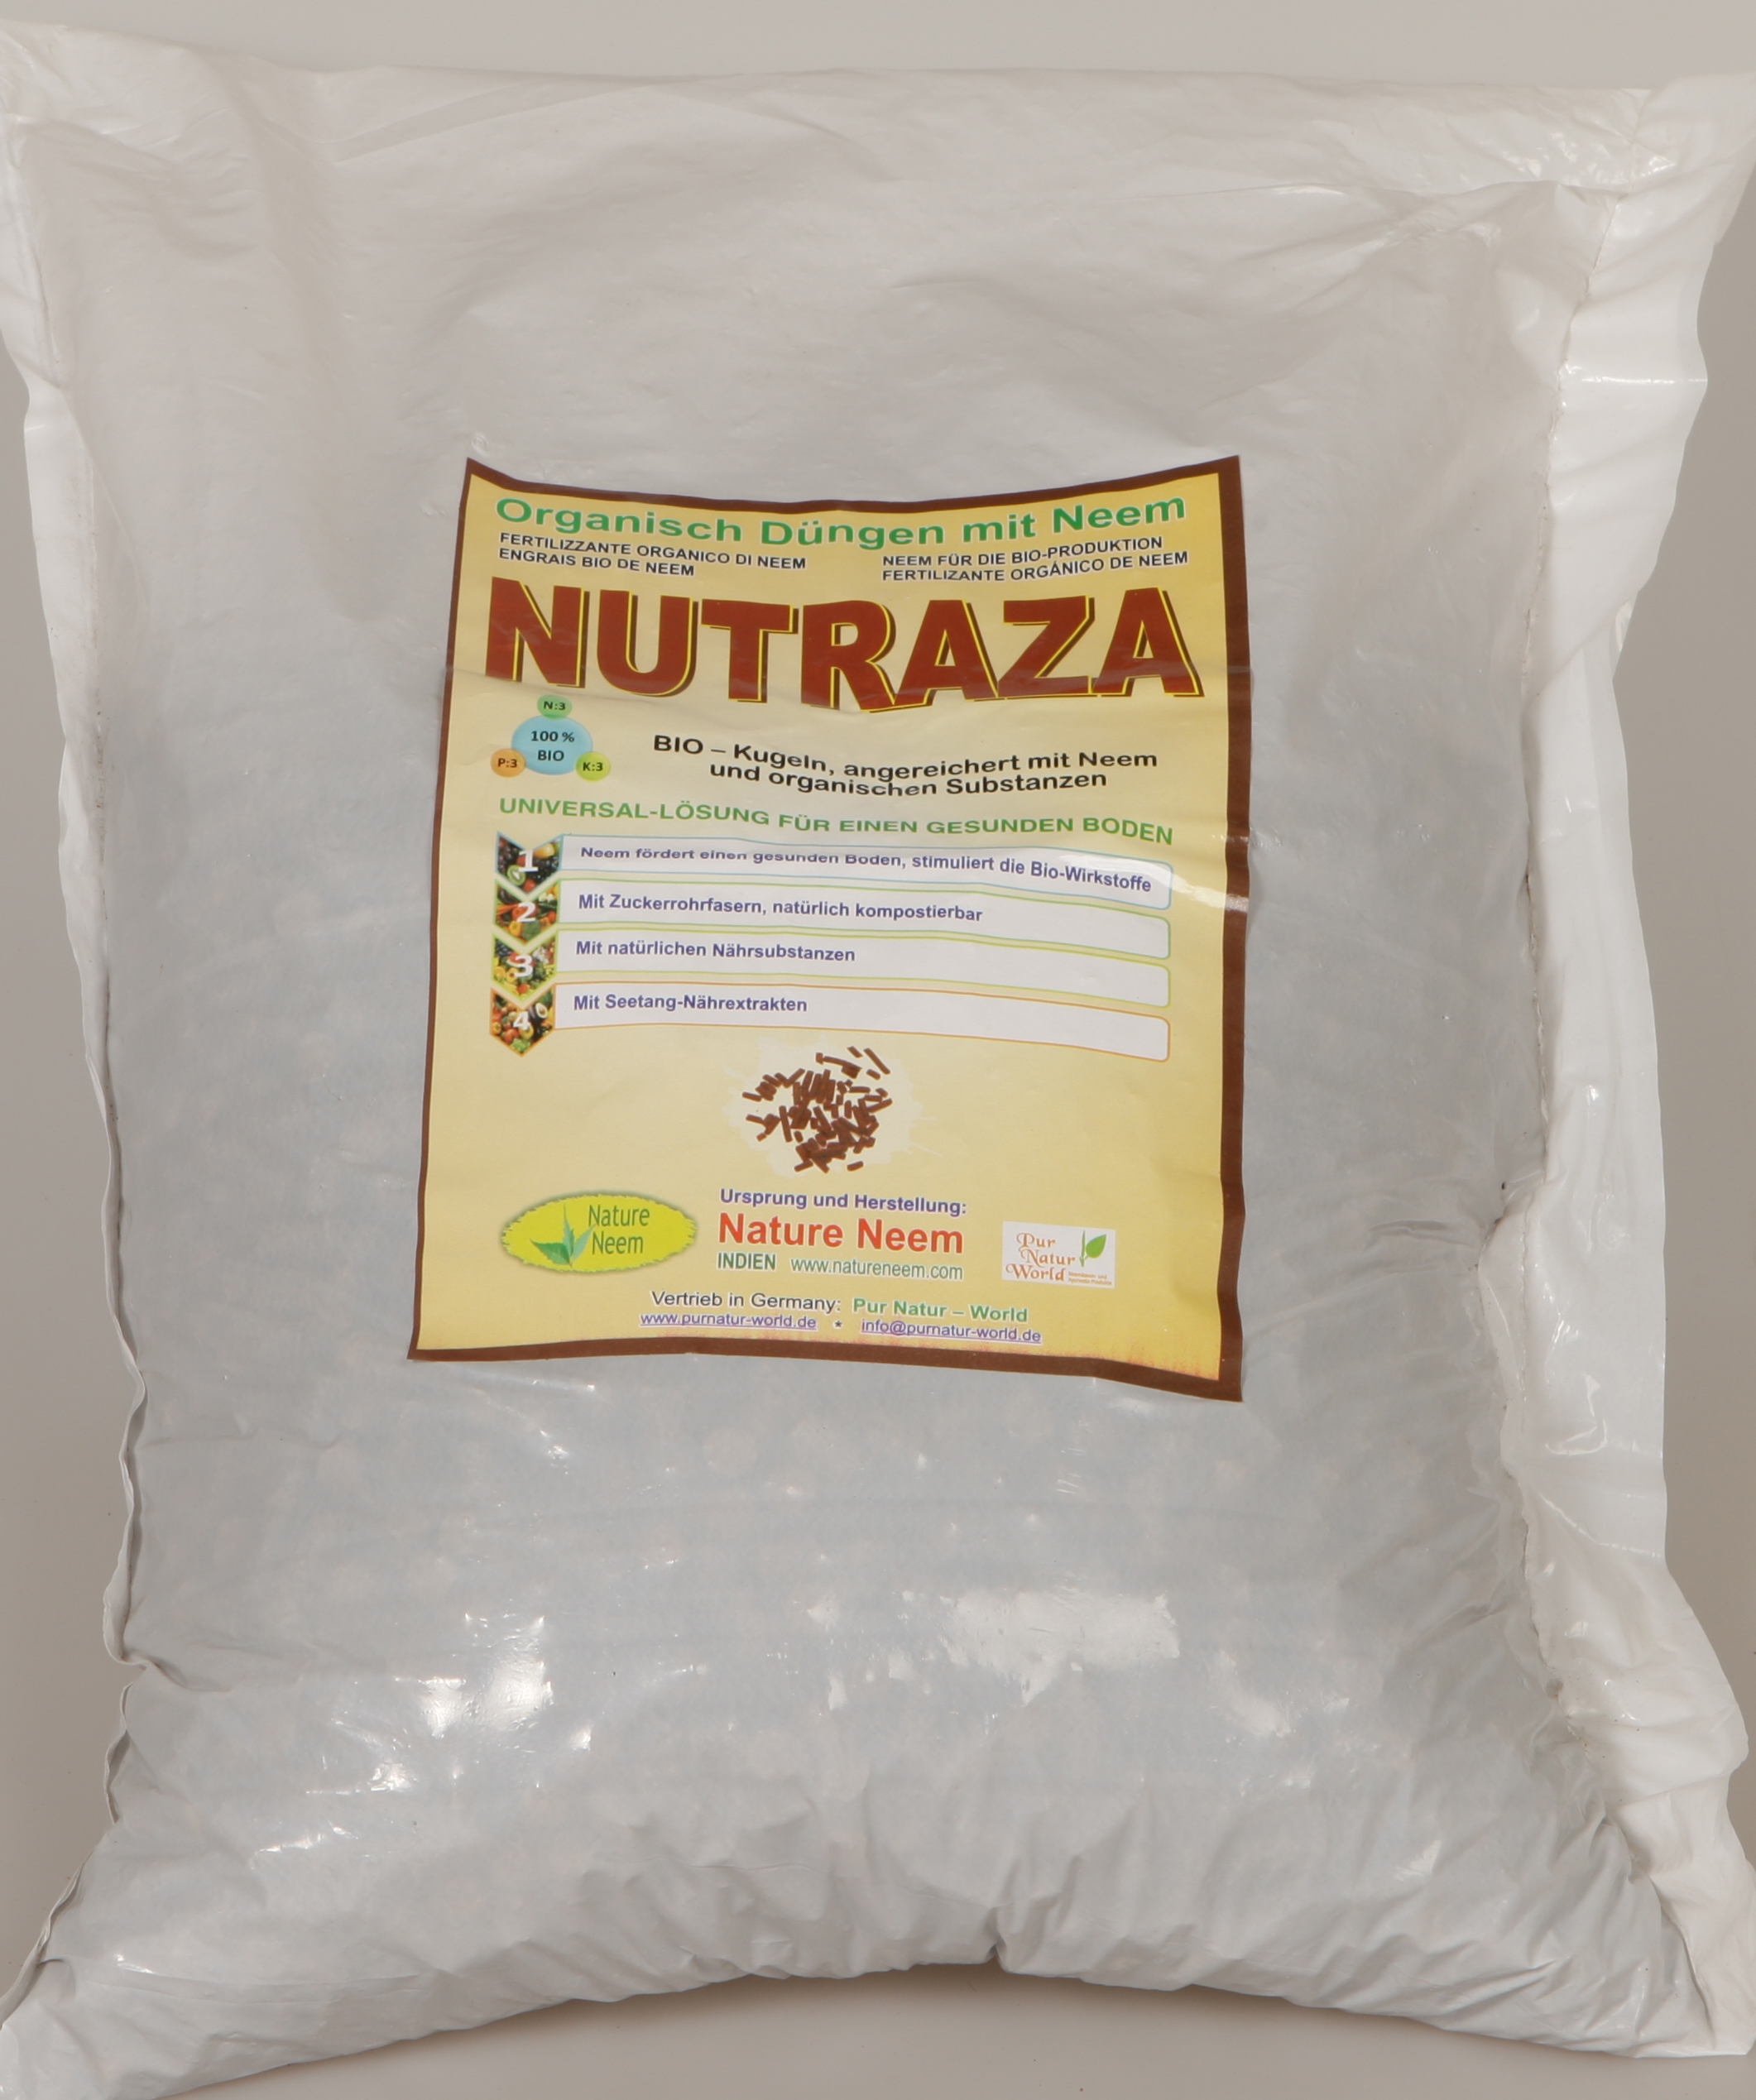 Pur-Natur-Nutraza-11-b